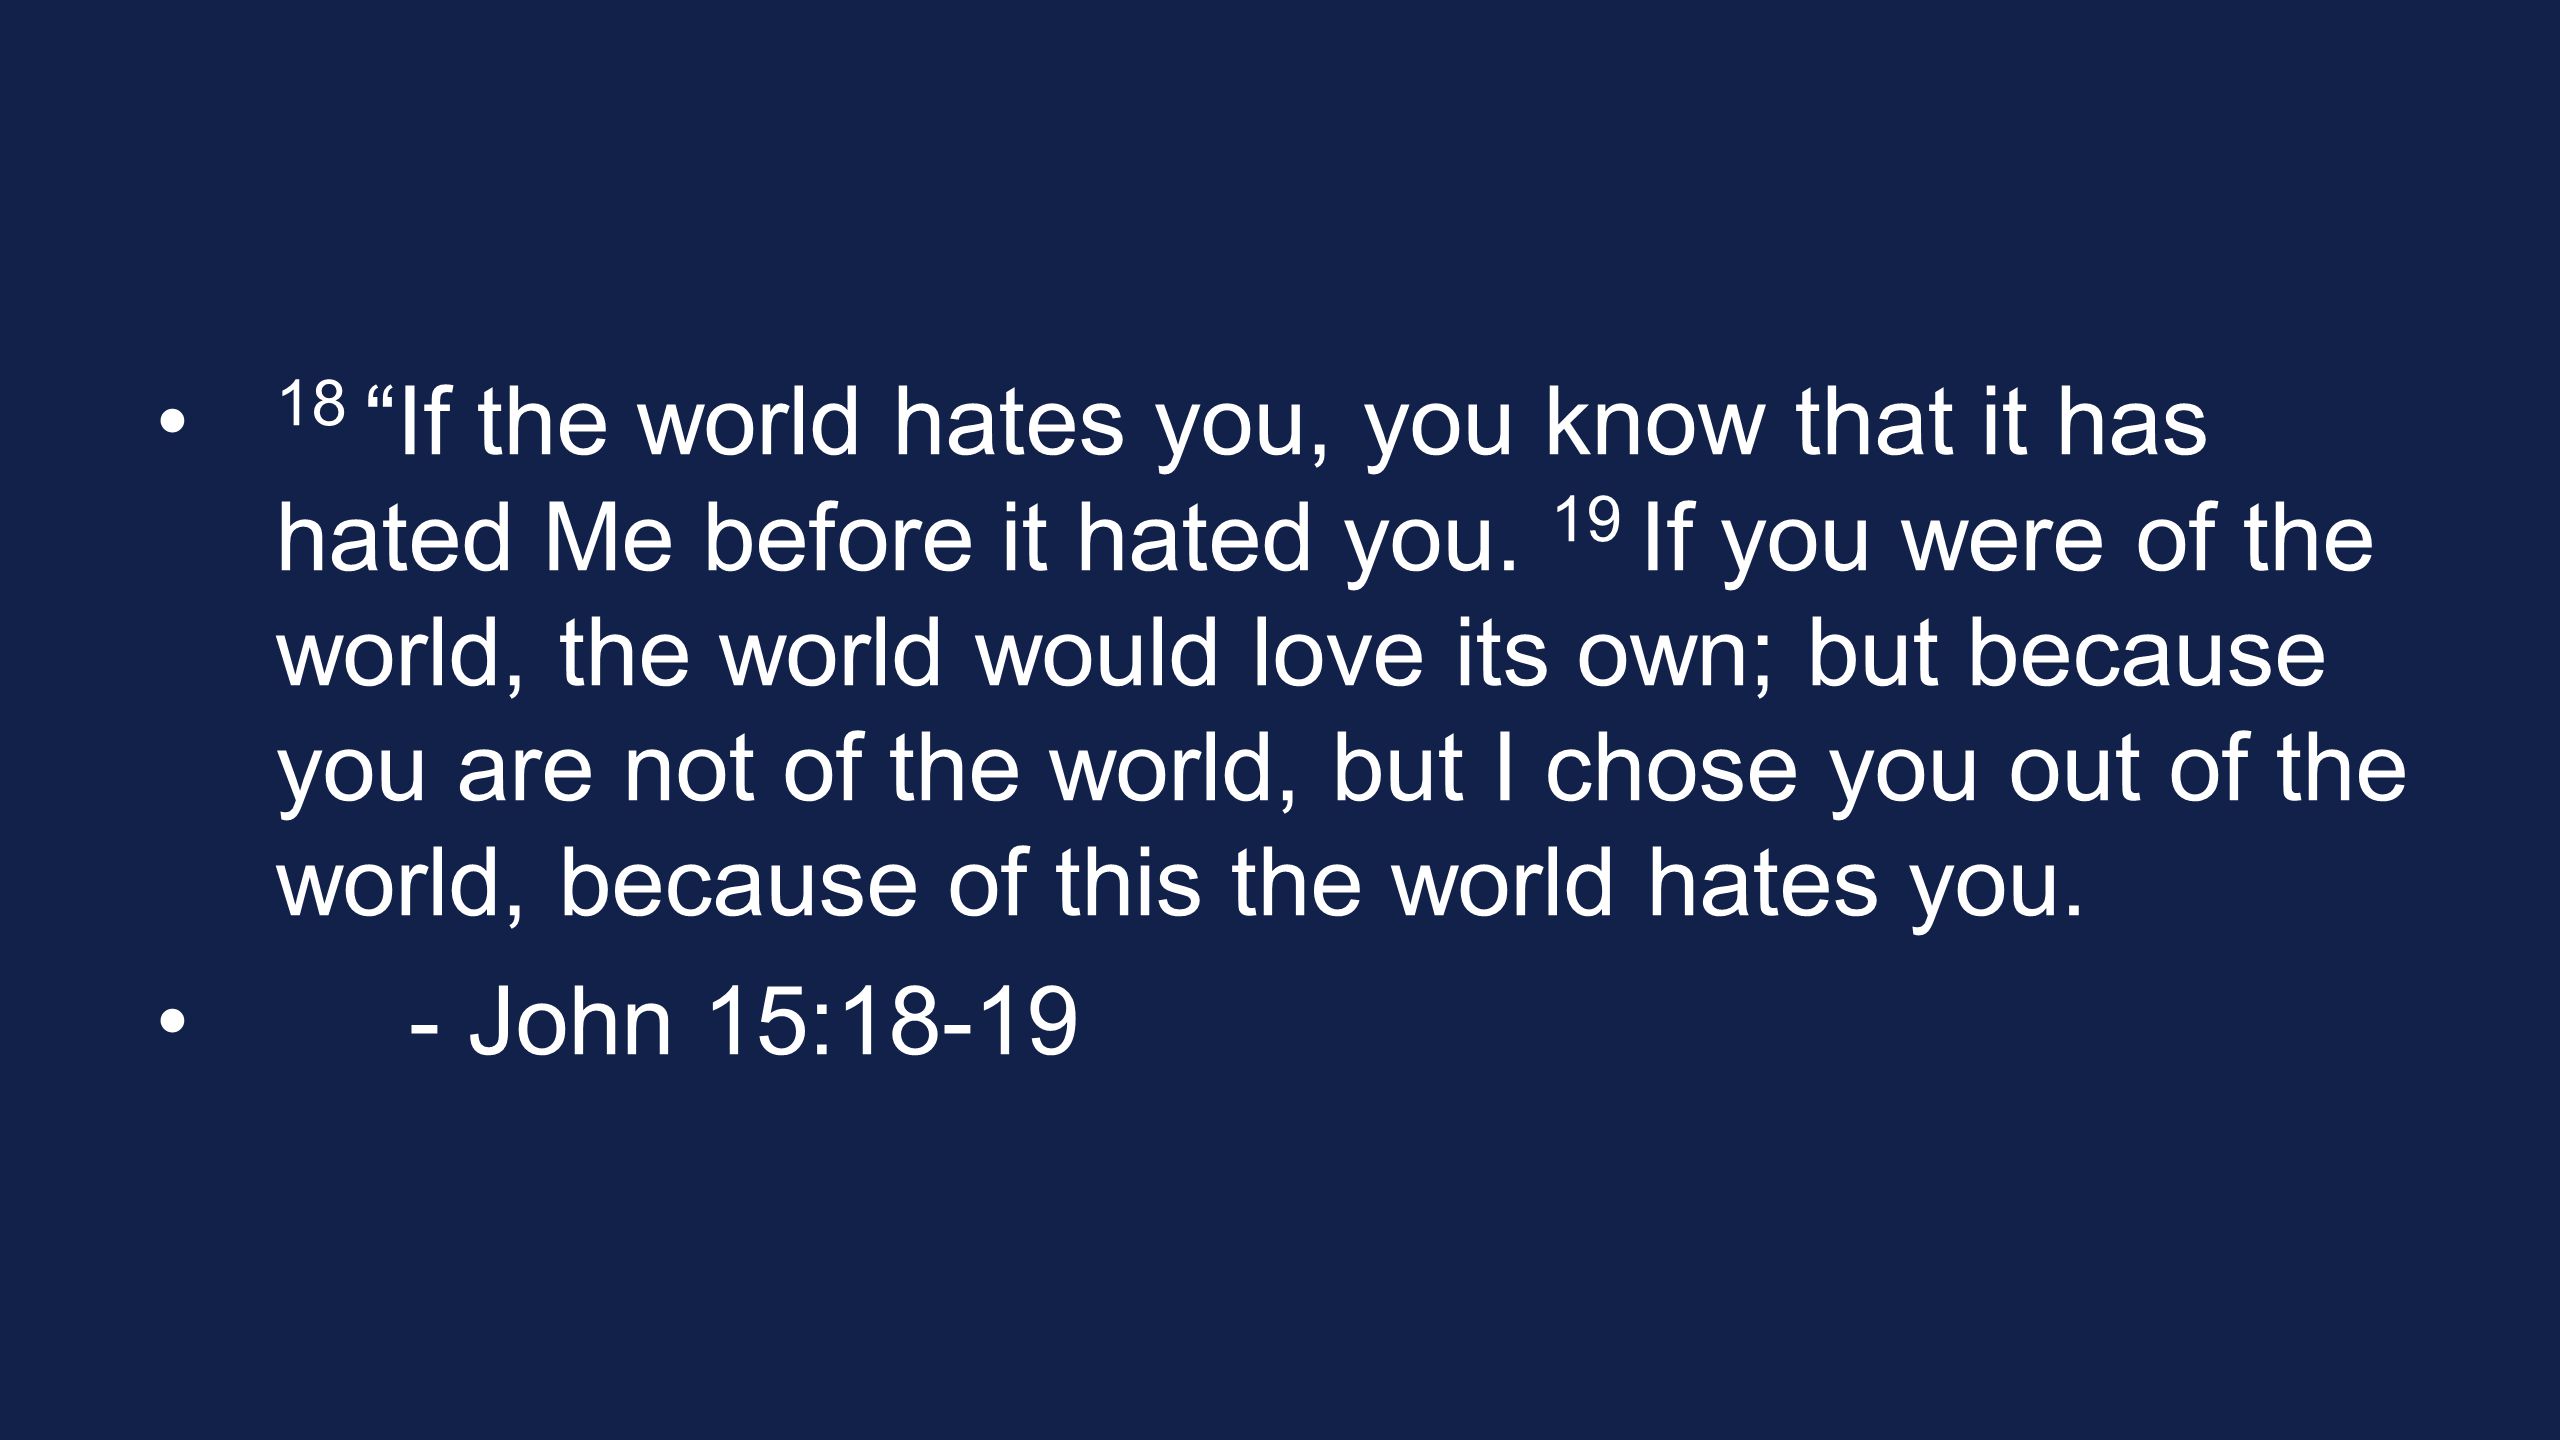 18 If the world hates you, you know that it has hated Me before it hated you.